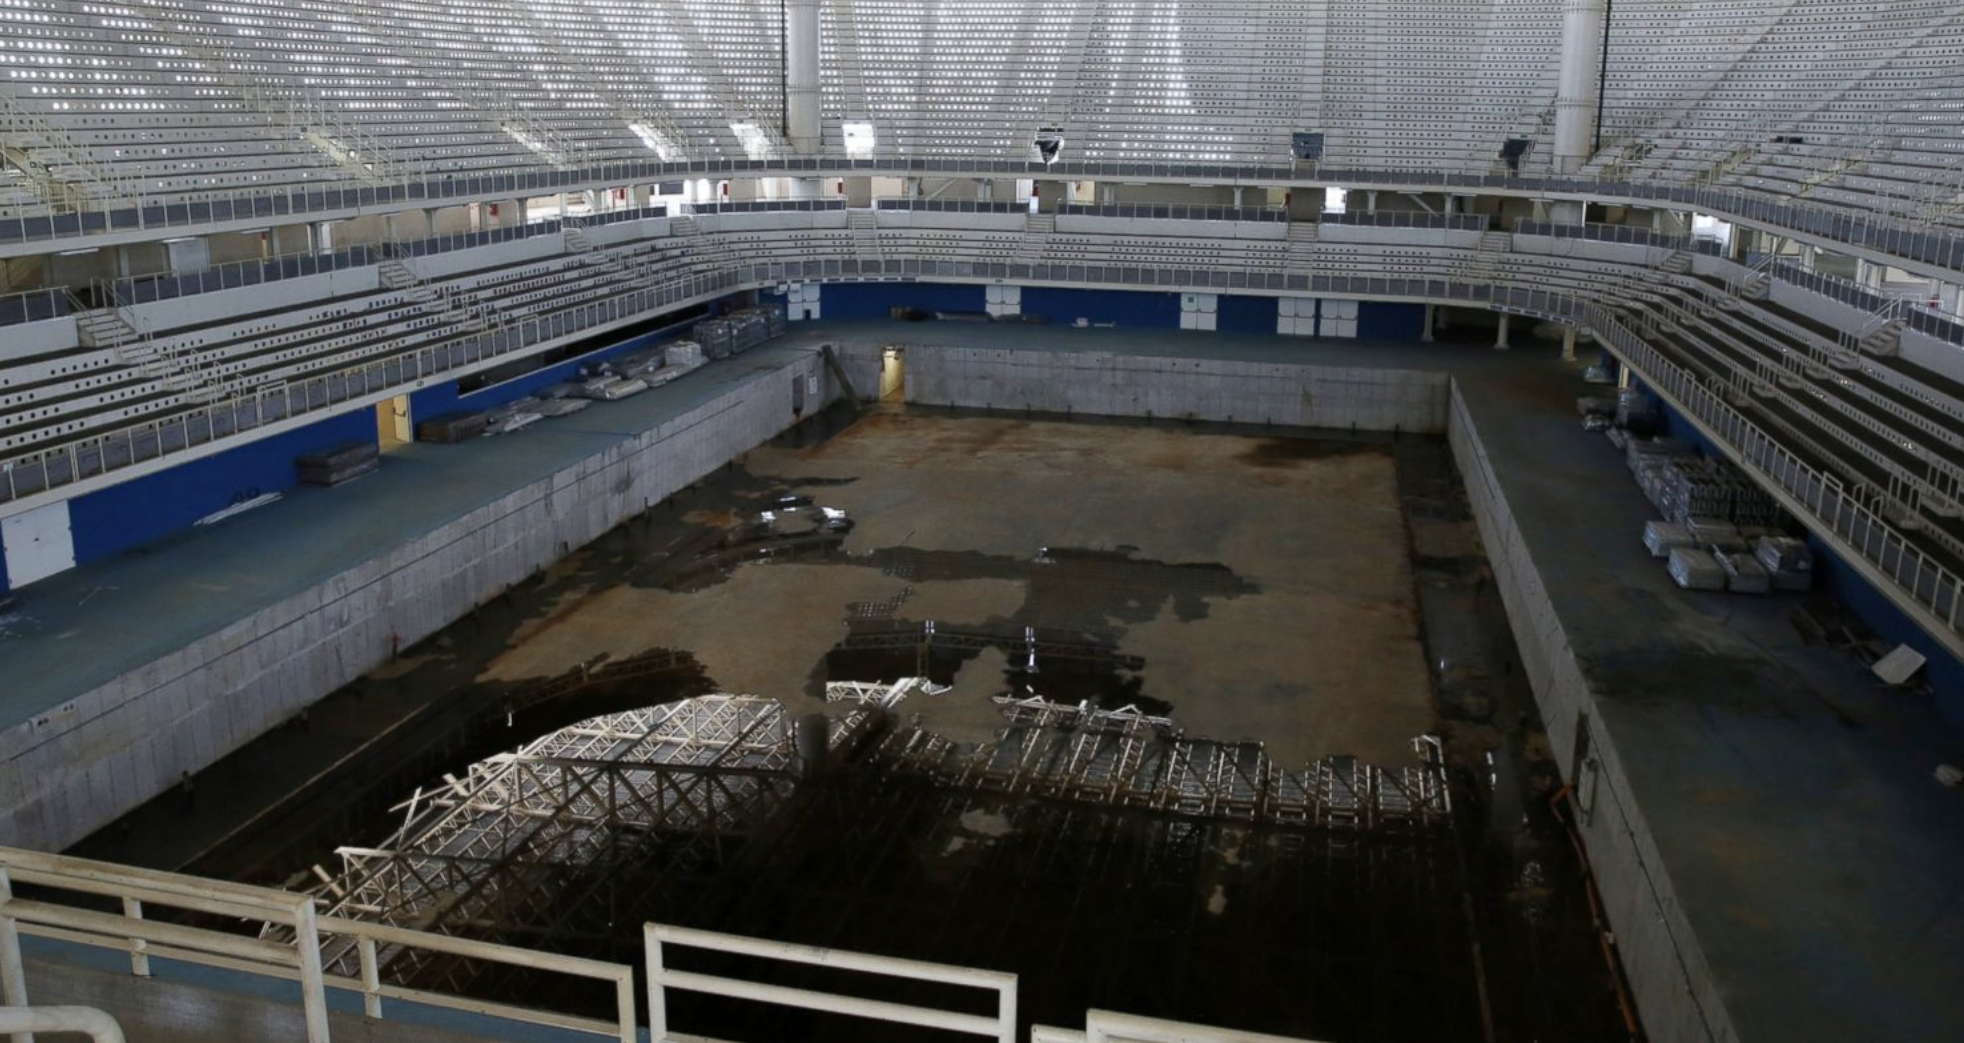 Eerie Photos of Abandoned Olympic Venues throughout History